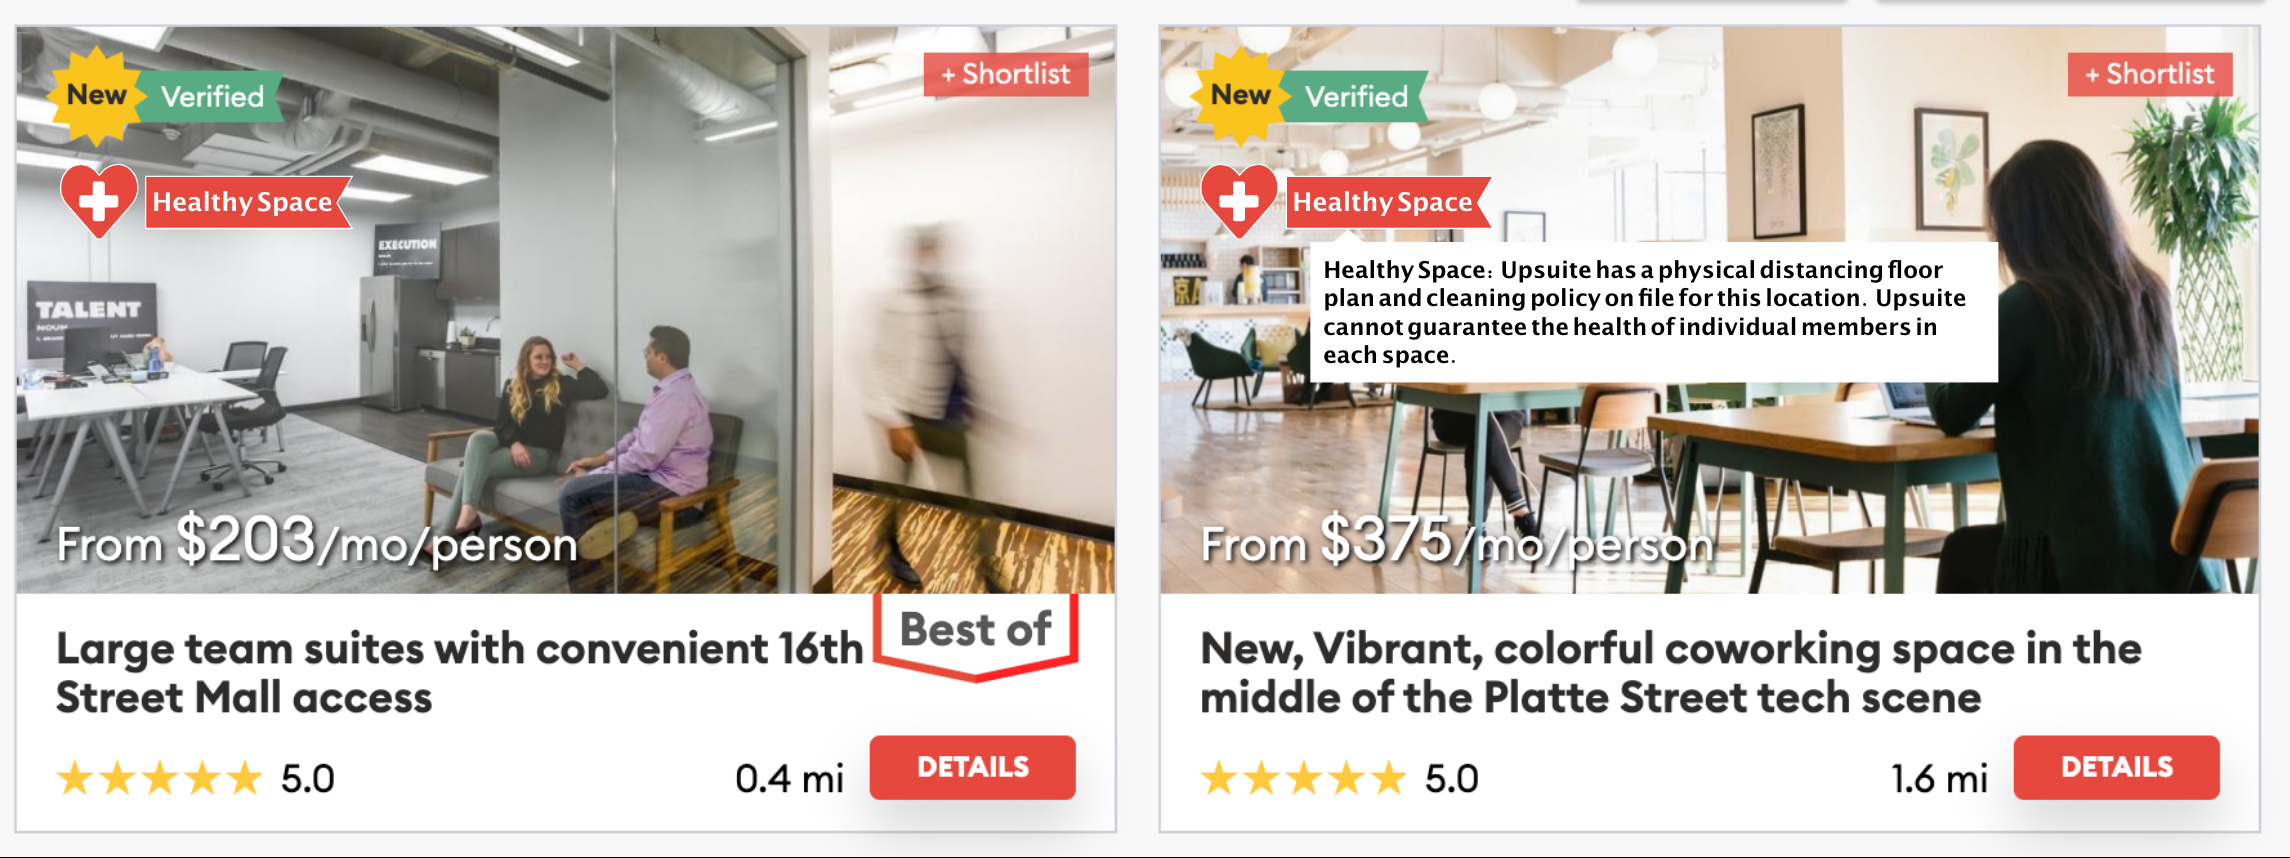 Upsuite Healthy Spaces Search Results